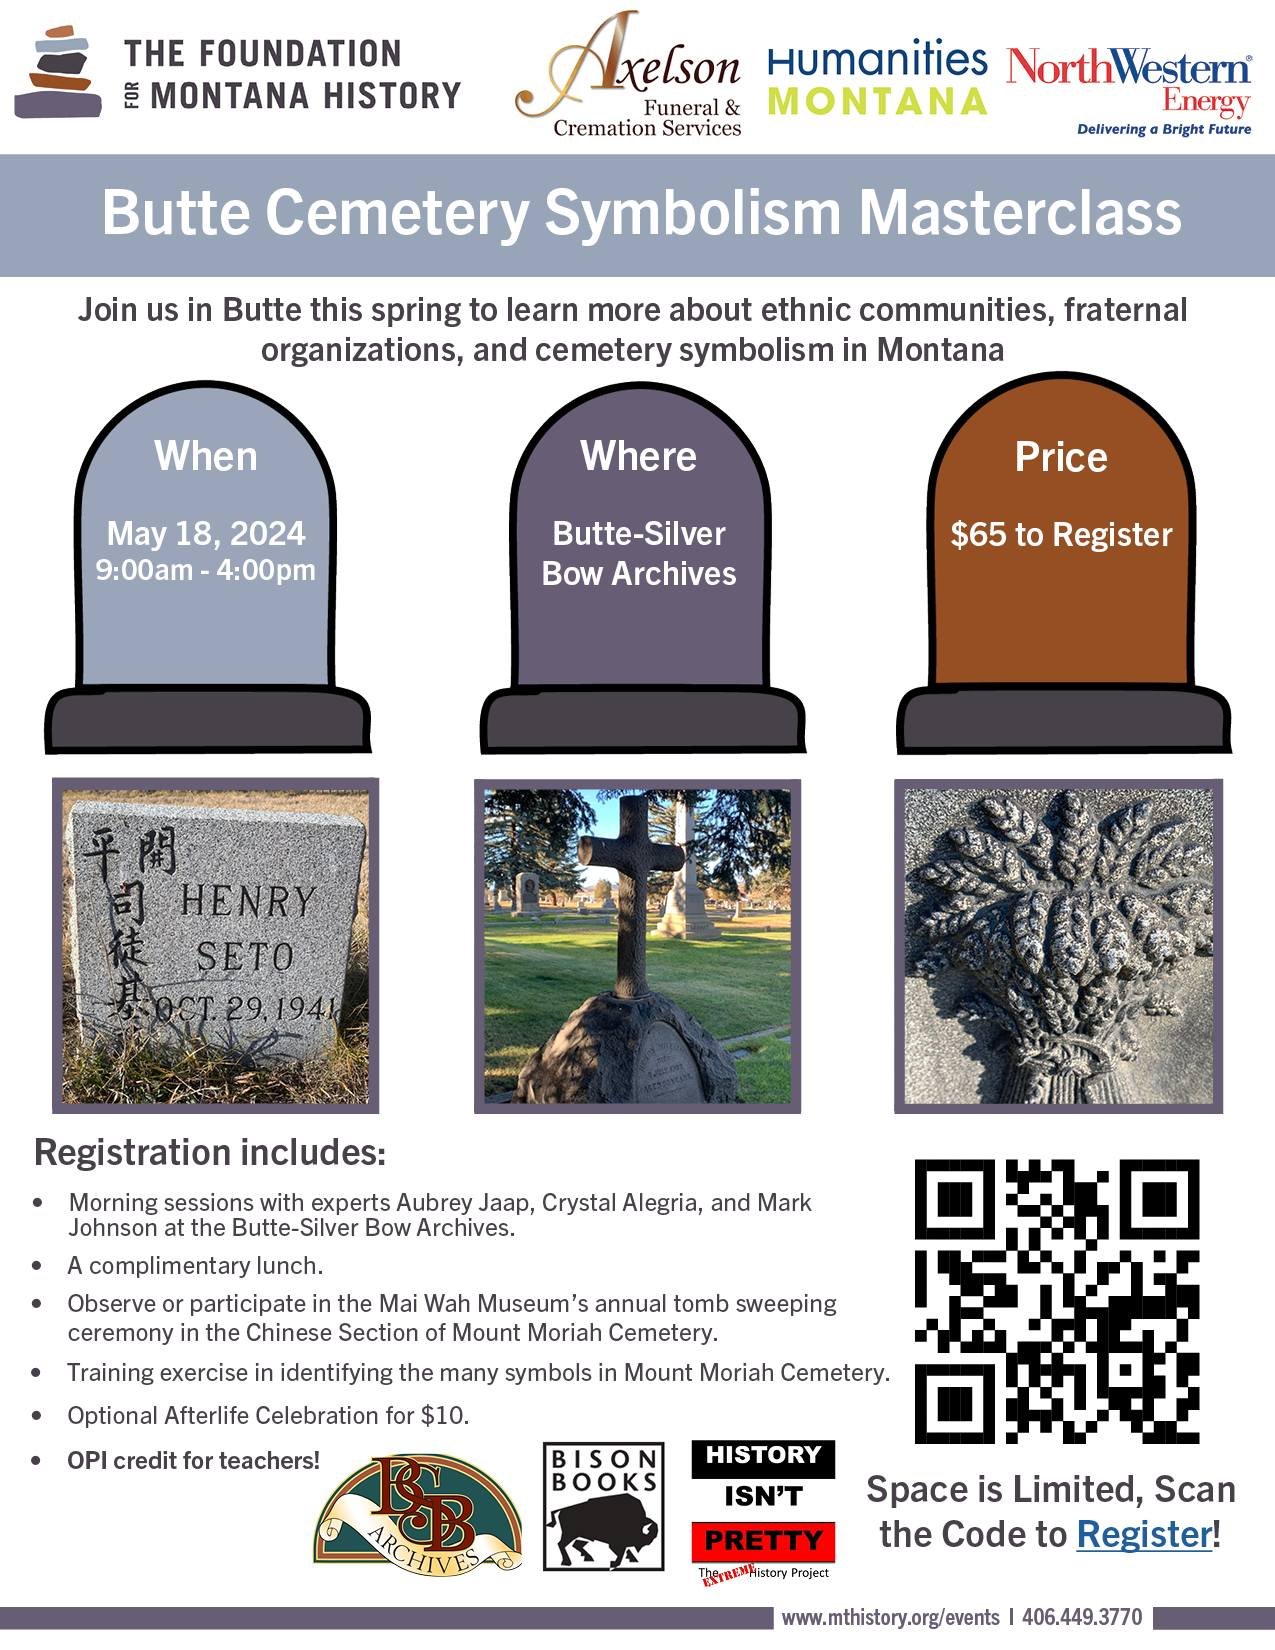 There are still a few spots left for the Butte Cemetery Masterclass on Saturday, May 18. Go to www.mthistory.org/events before the bookings officially close this Friday at noon. Don't miss your opportunity to join in on this engaging day with guest s